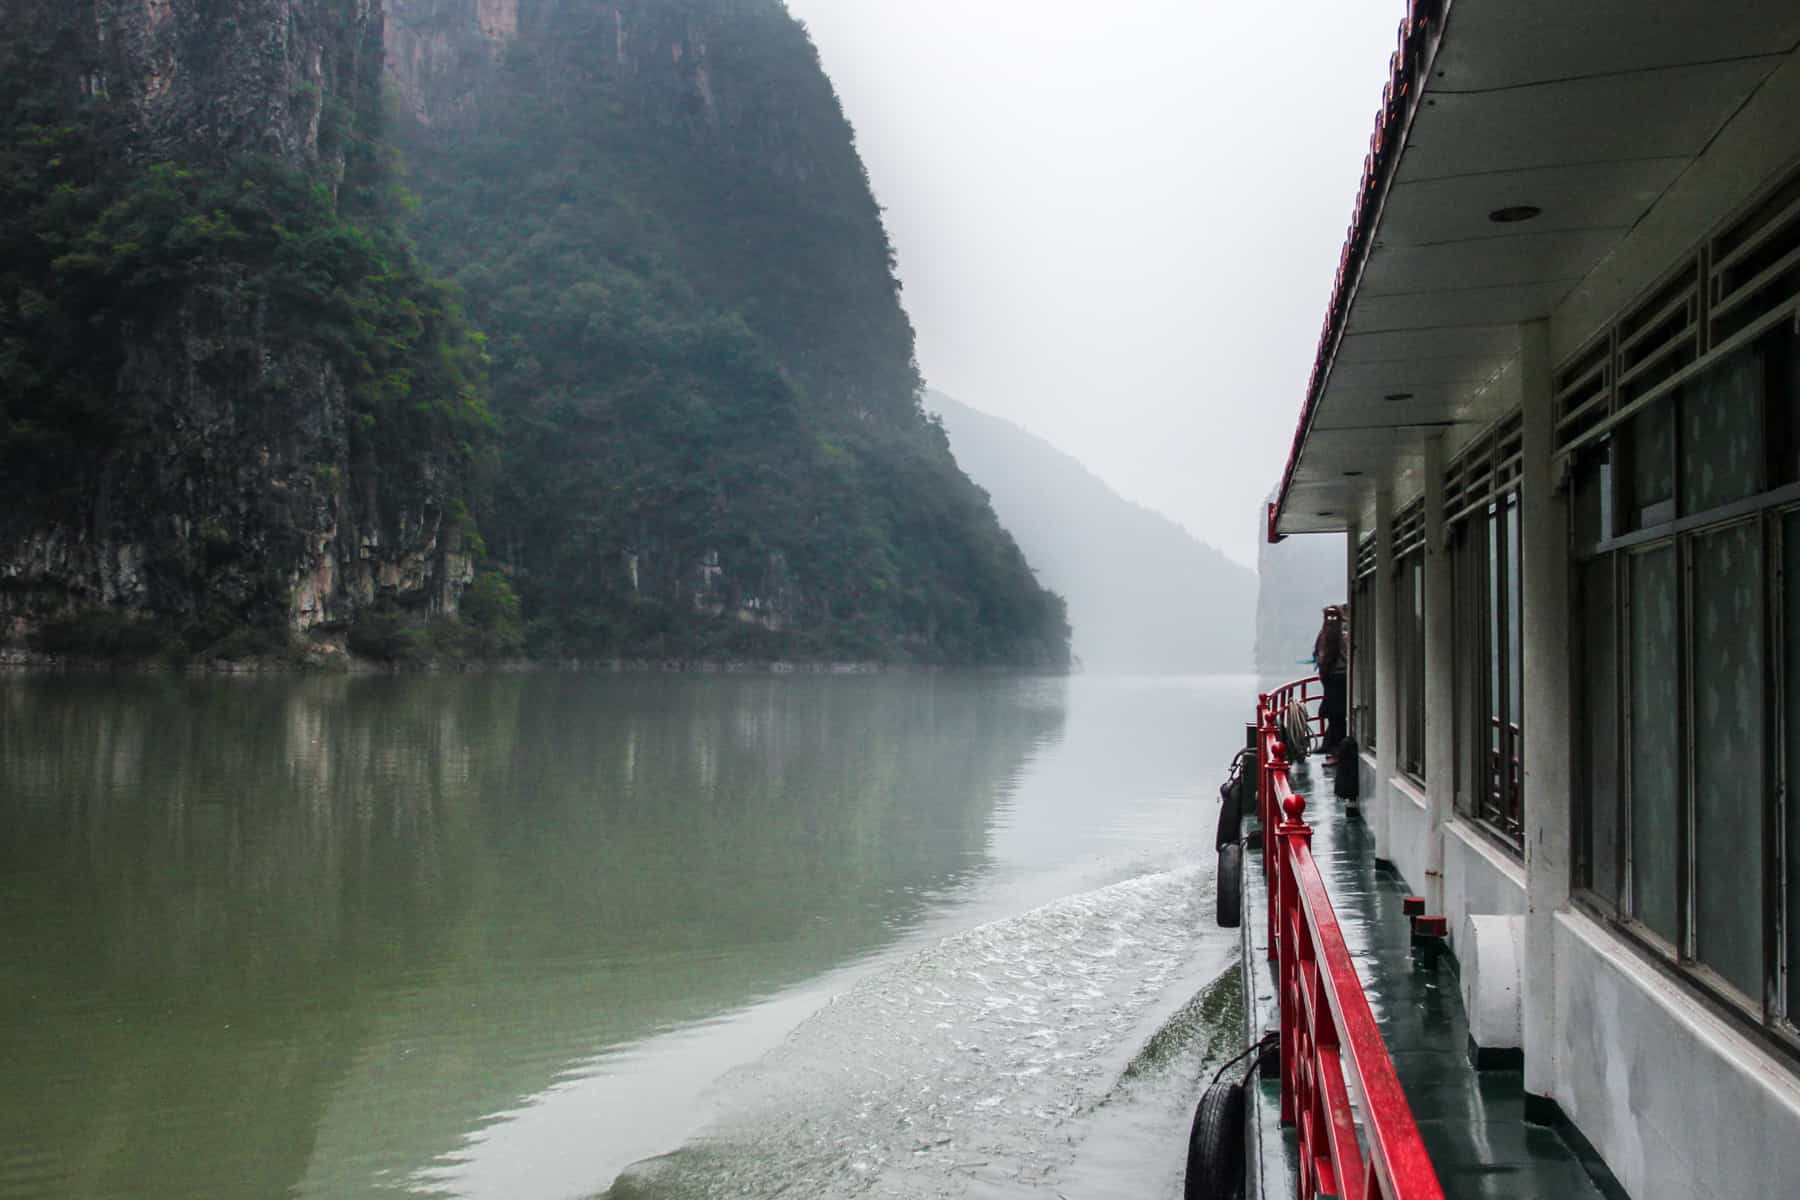 A small, white and red cruise boat slow floats on the murky green Yangtze River in China towards mist covered cliffs